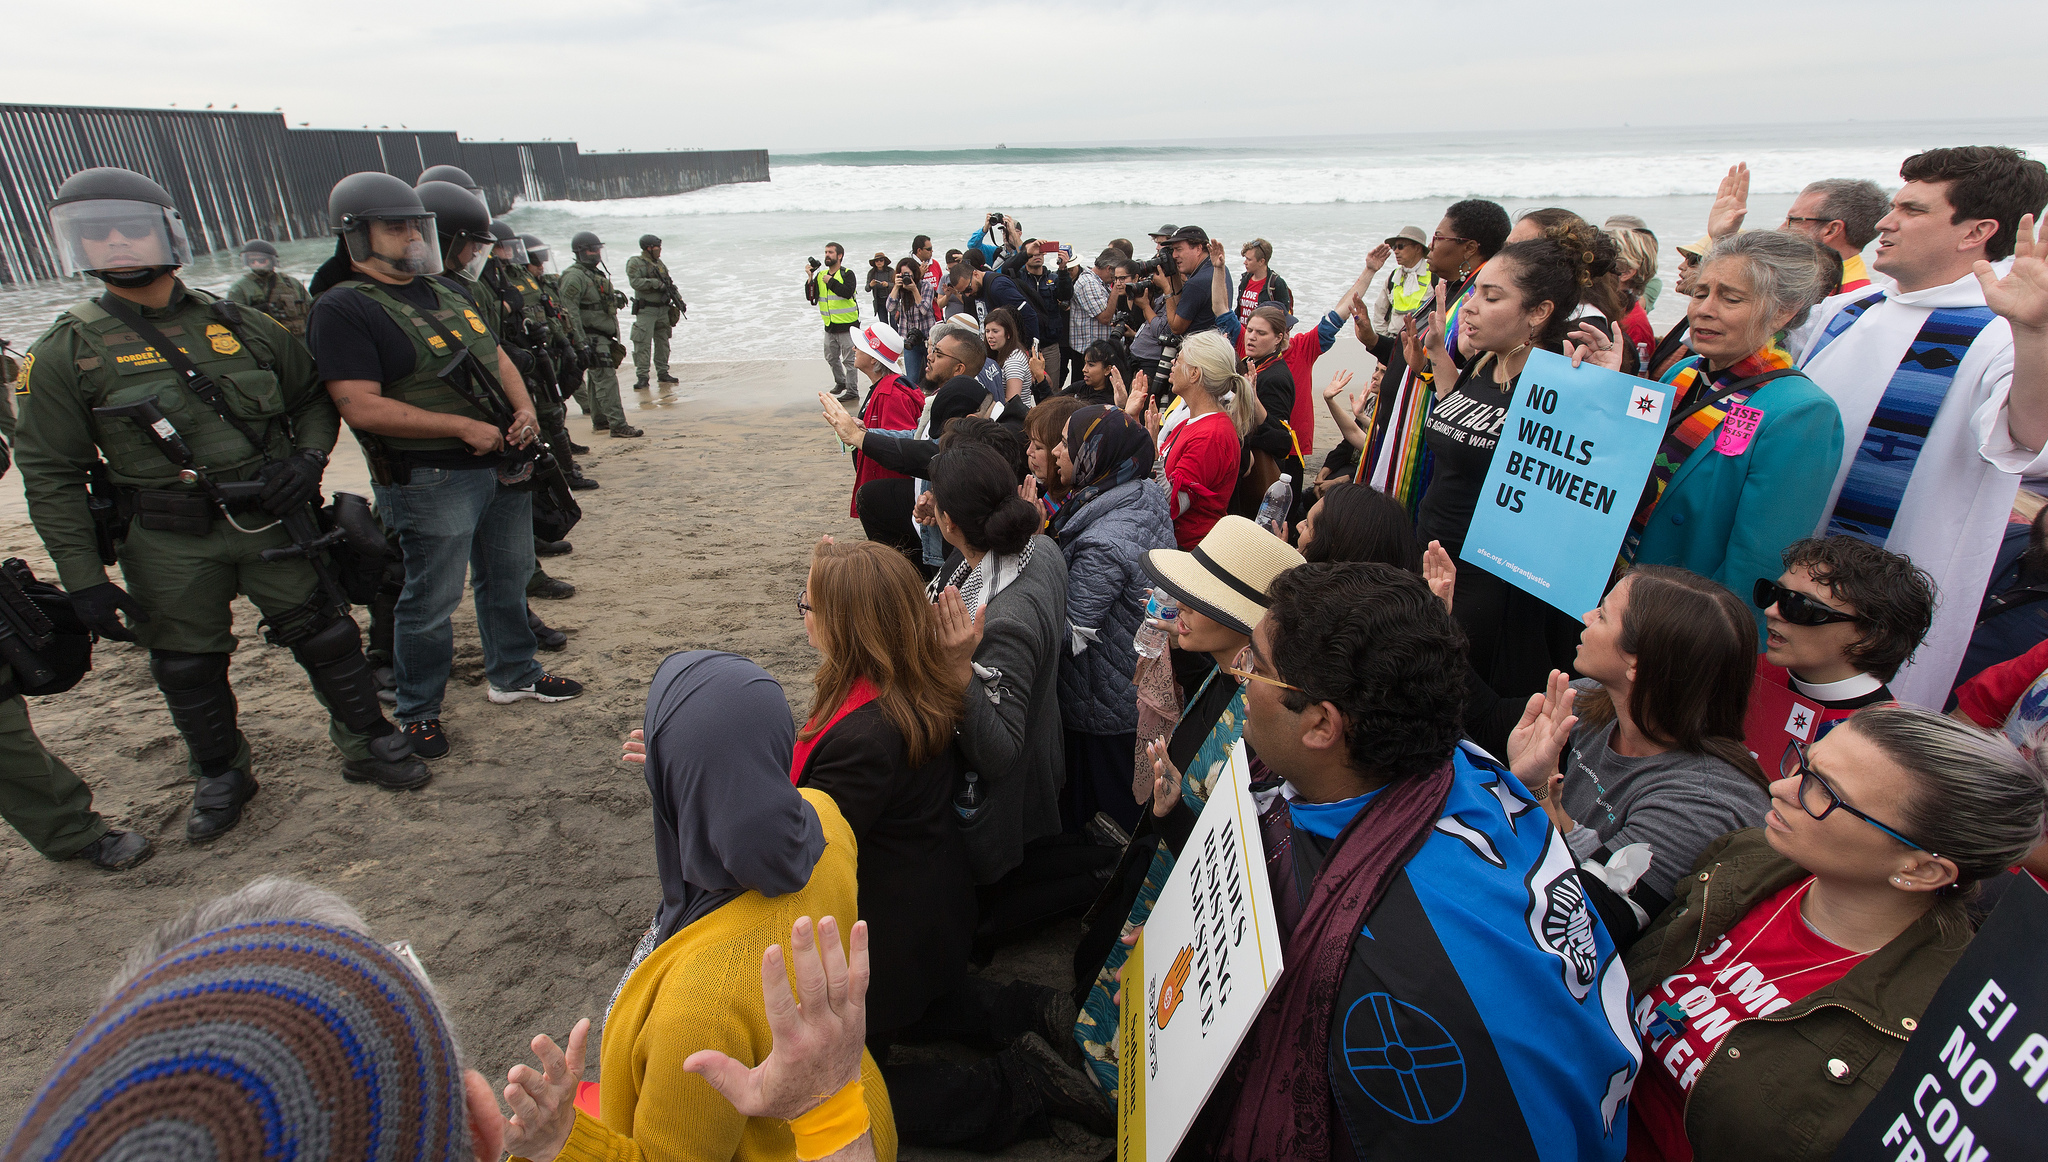 Faith leaders and other supporters of immigrant rights face U.S. Border Patrol agents at the fence between the U.S. and Mexico in San Diego. At bottom right is Emma Escobar of The United Methodist Church's Baltimore-Washington Conference. Photo by Mike DuBose, UMNS.